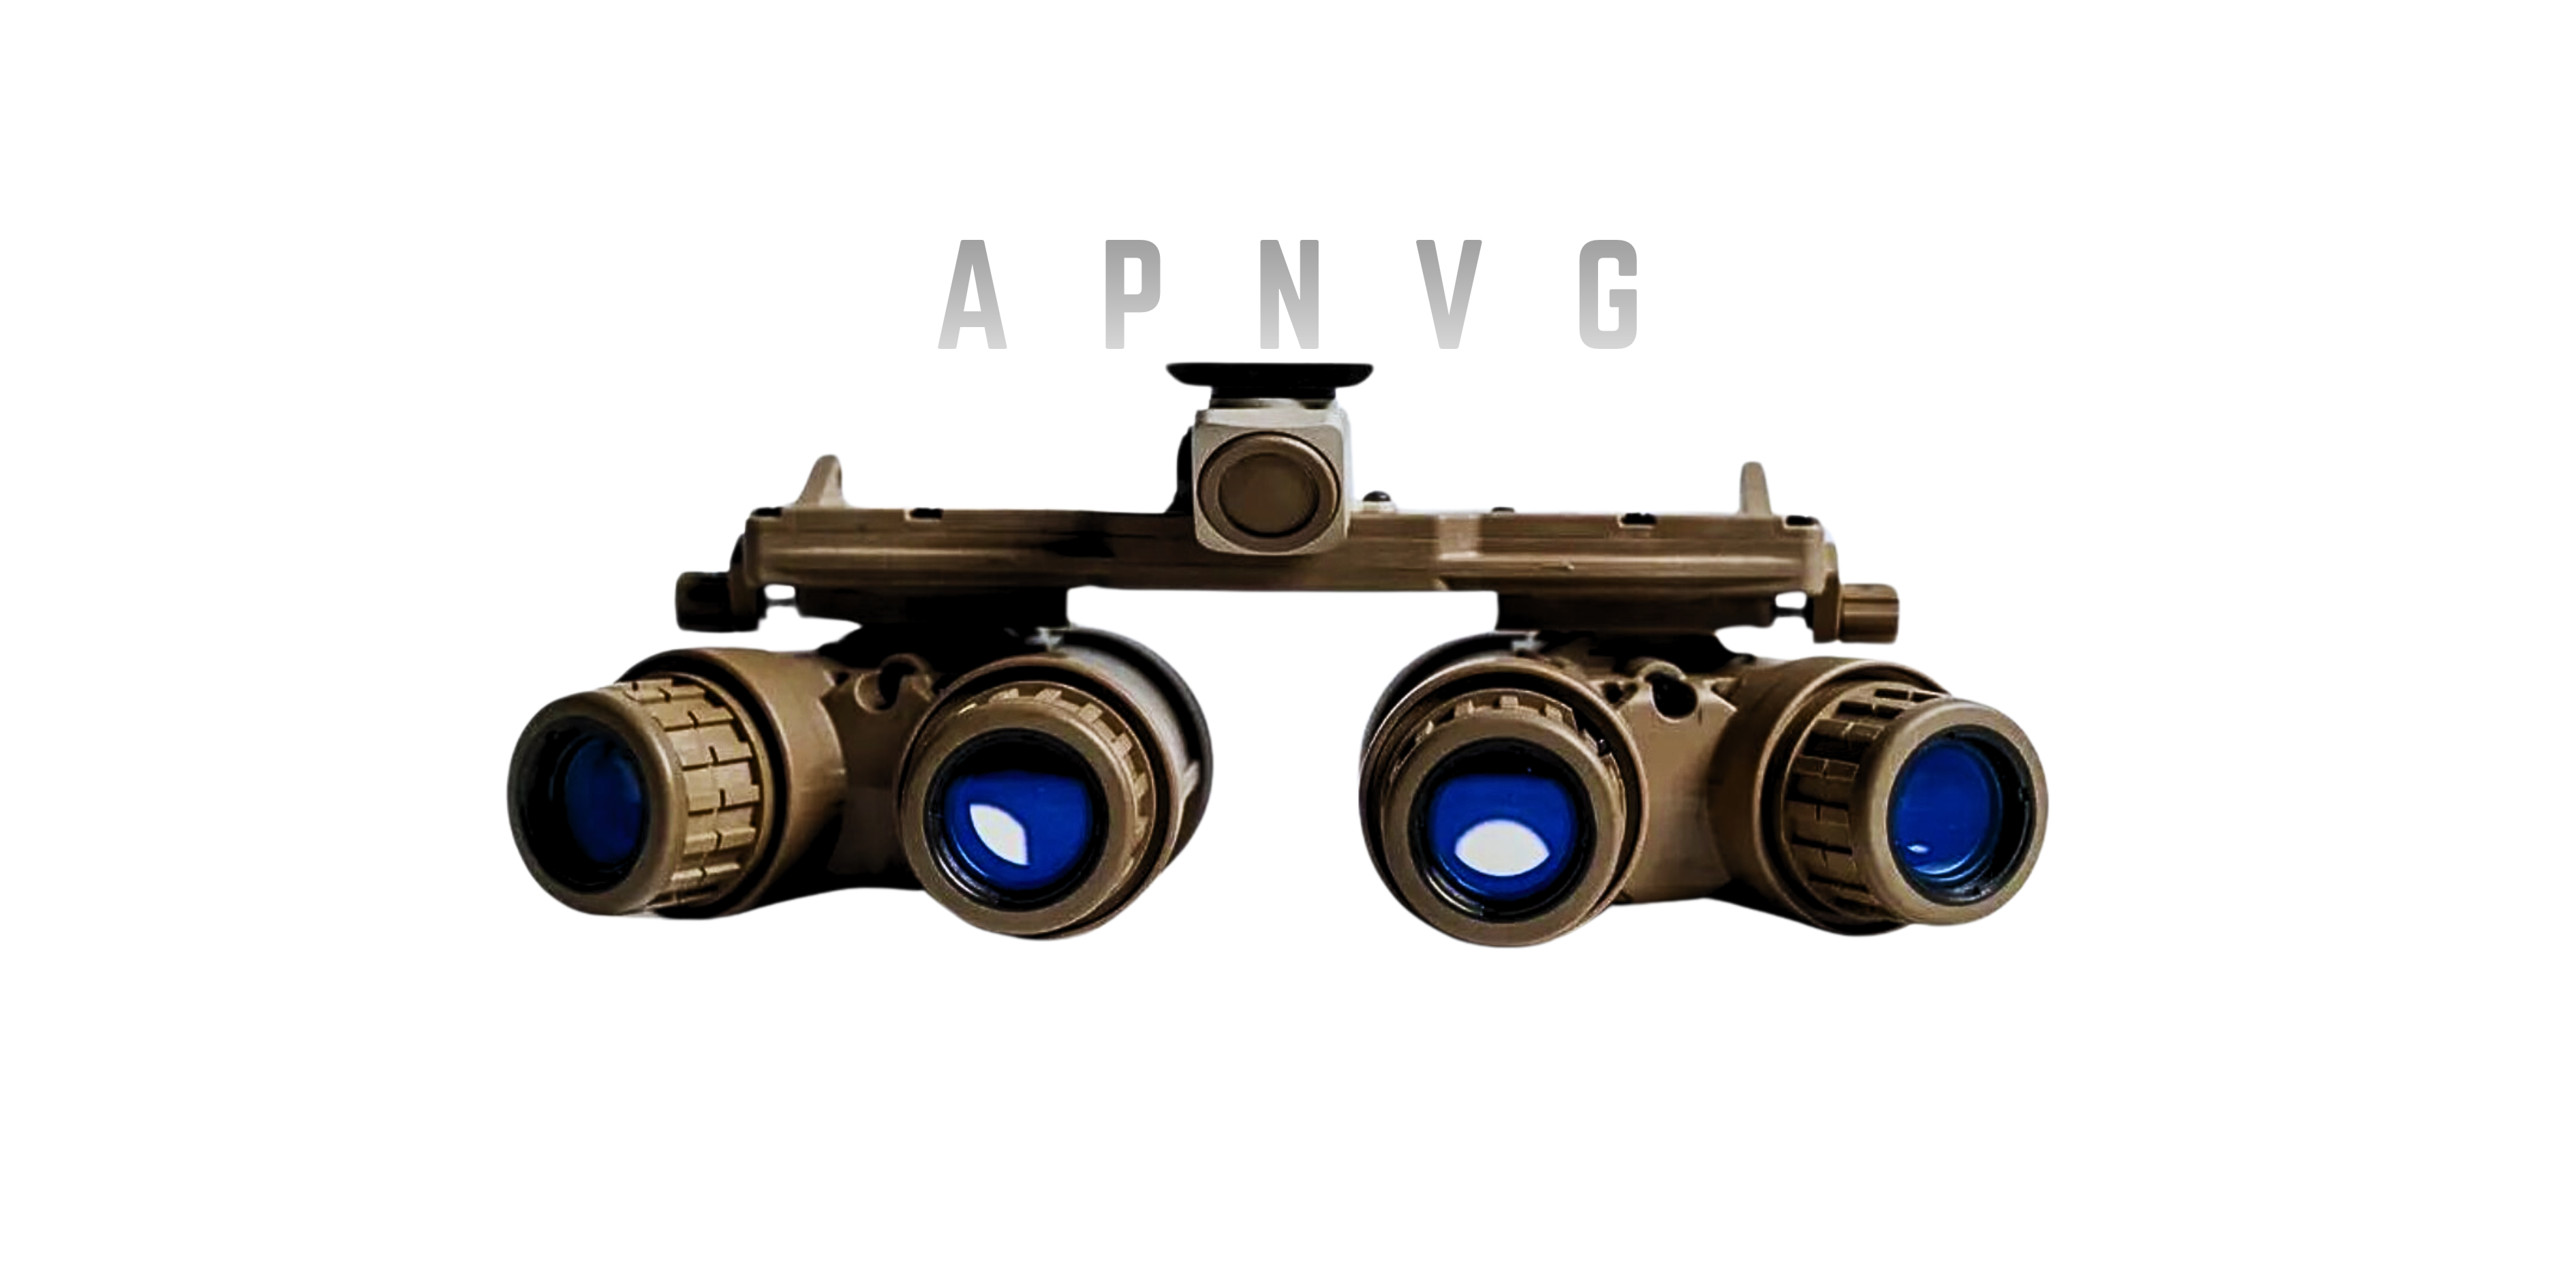 APNVG night vision goggles for tactical operations